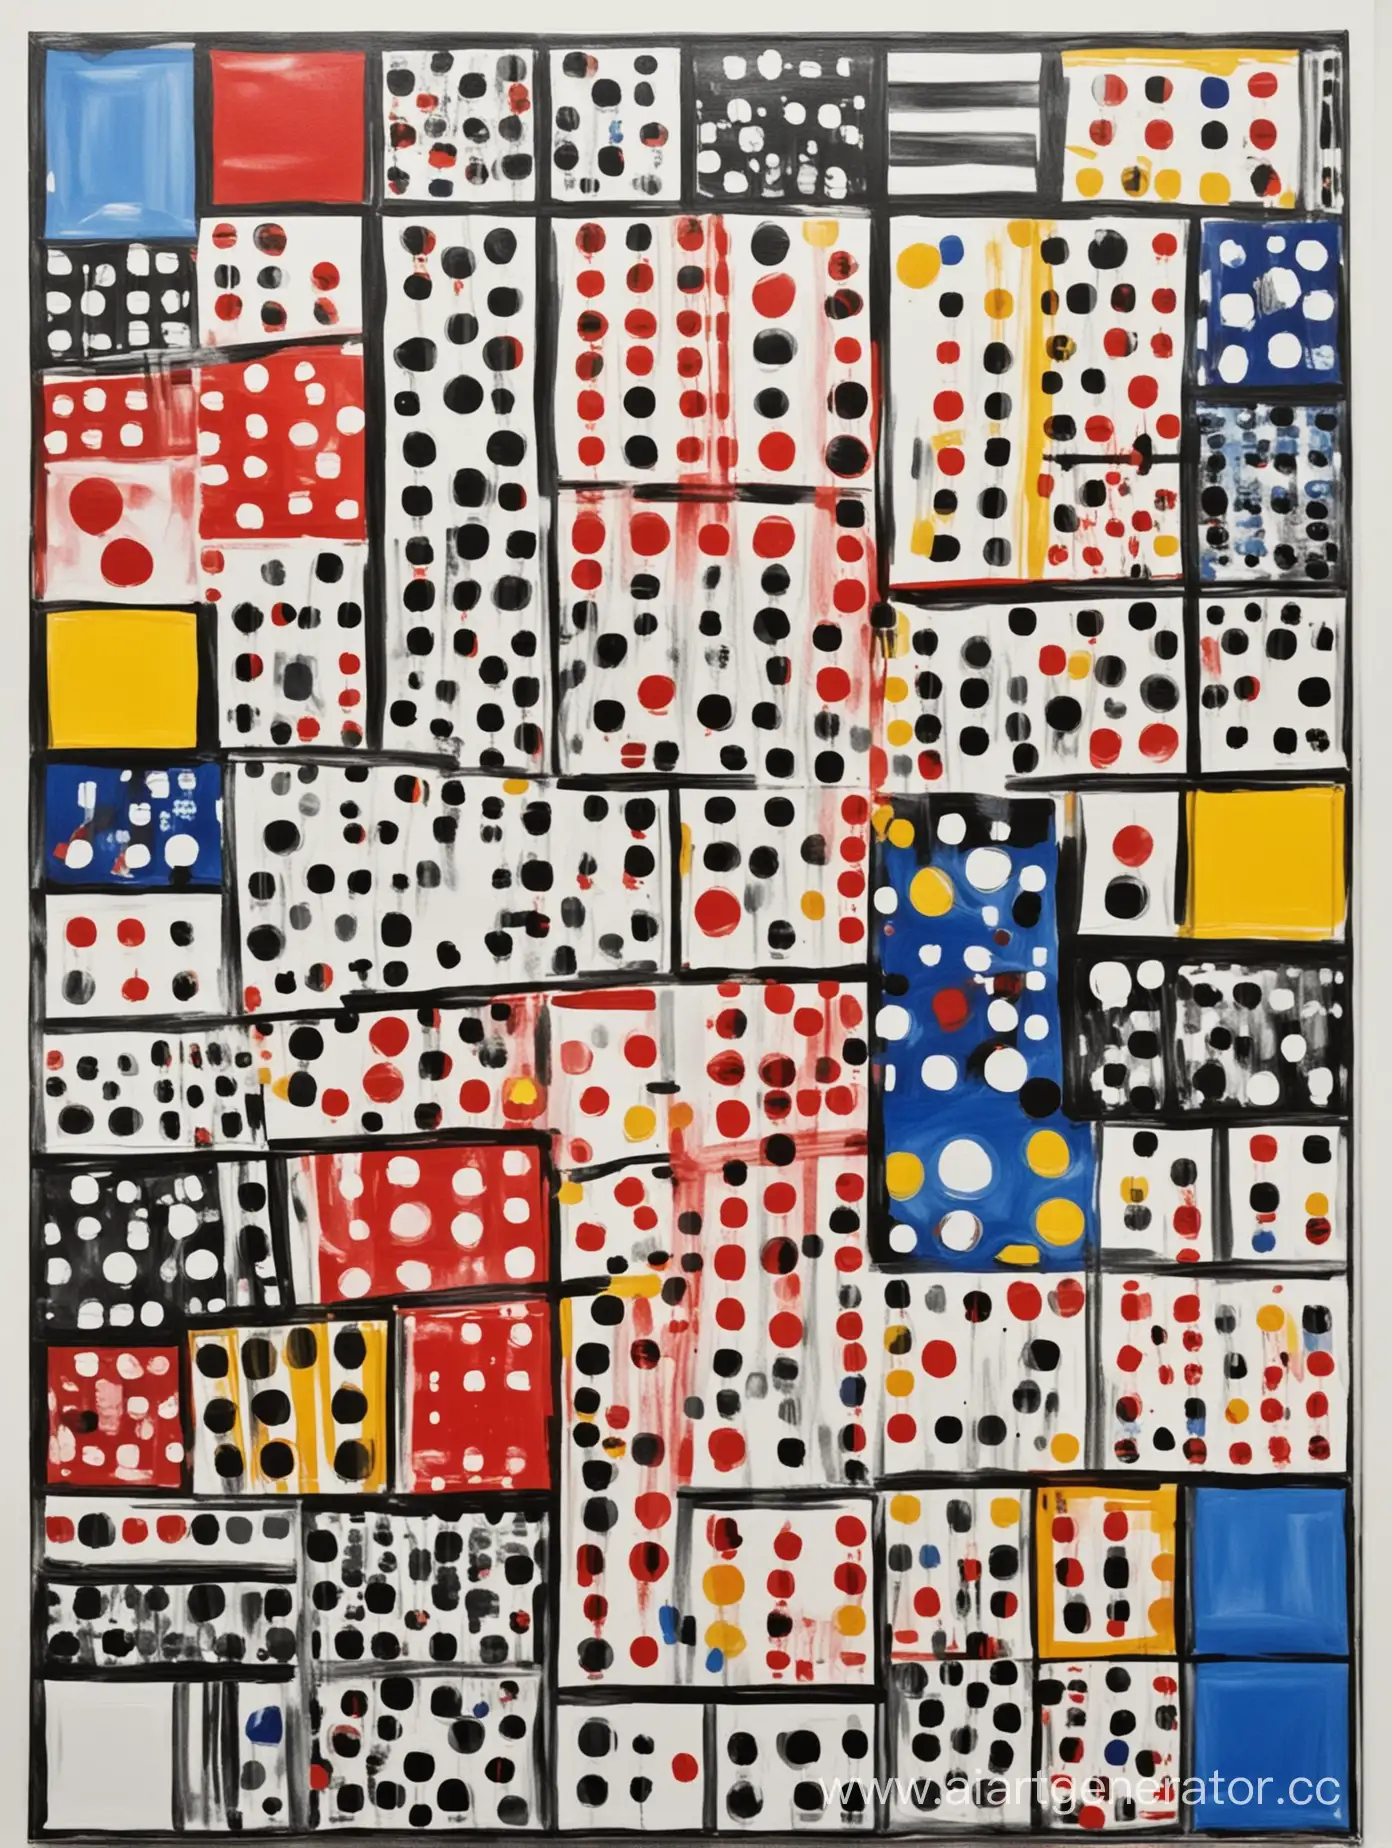 make an image based on the ideas of Kusama Yayoi and Pete Mondrian in the style of abstraction